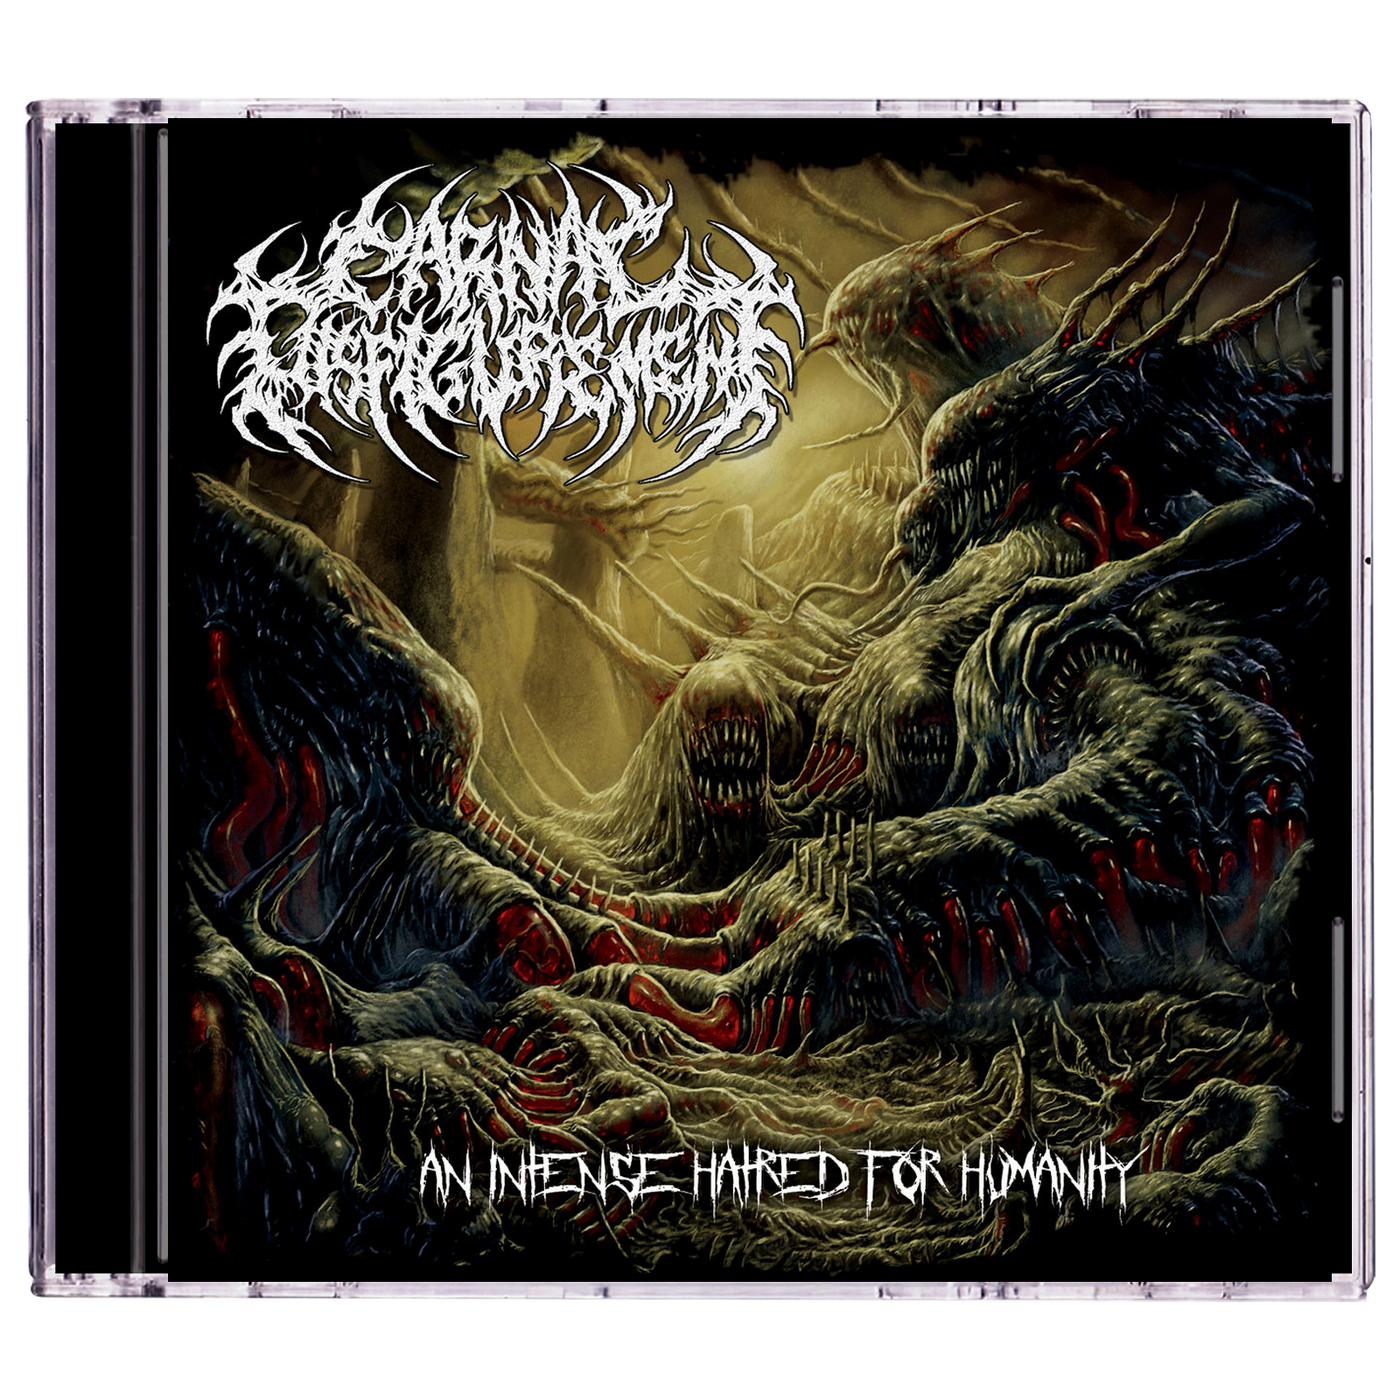 Carnal Disfigurement 'An Intense Hatred For Humanity' CD